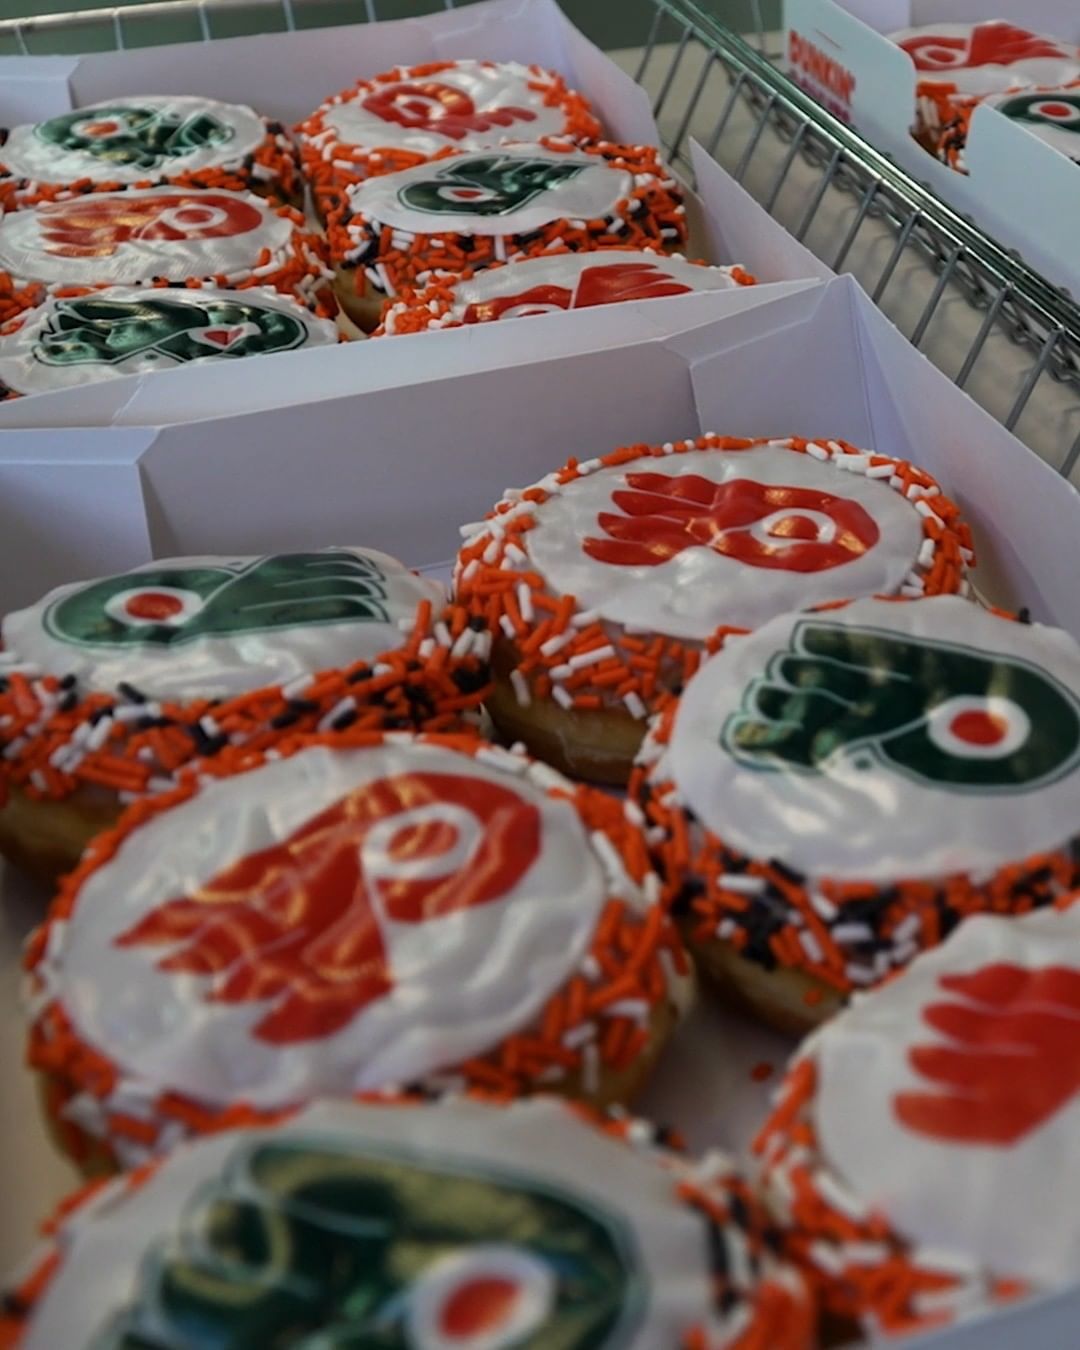 We’re celebrating #NationalDonutDay by hooking up local youth hockey players wit...